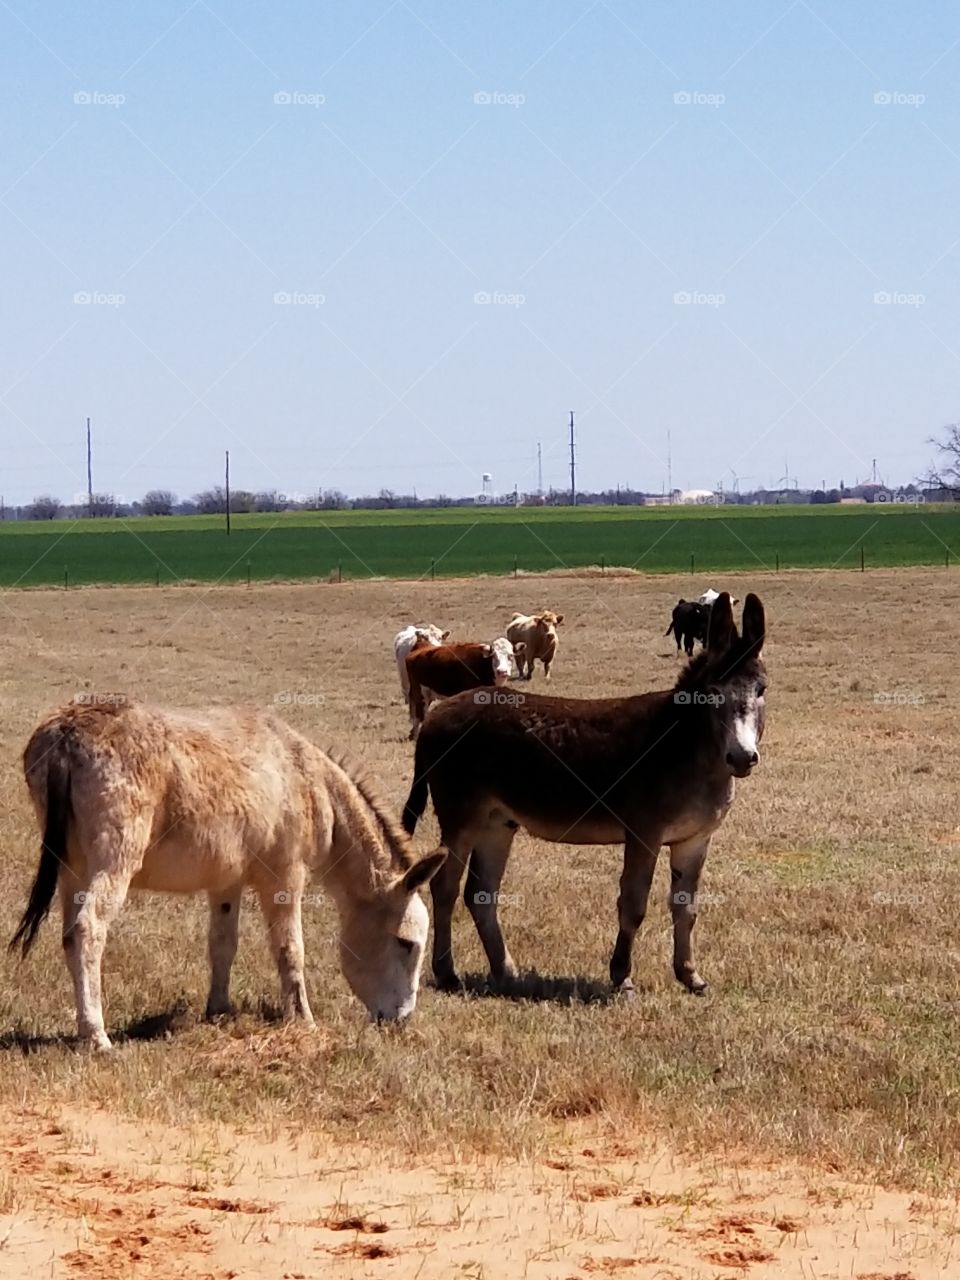 Donkey watching over cattle